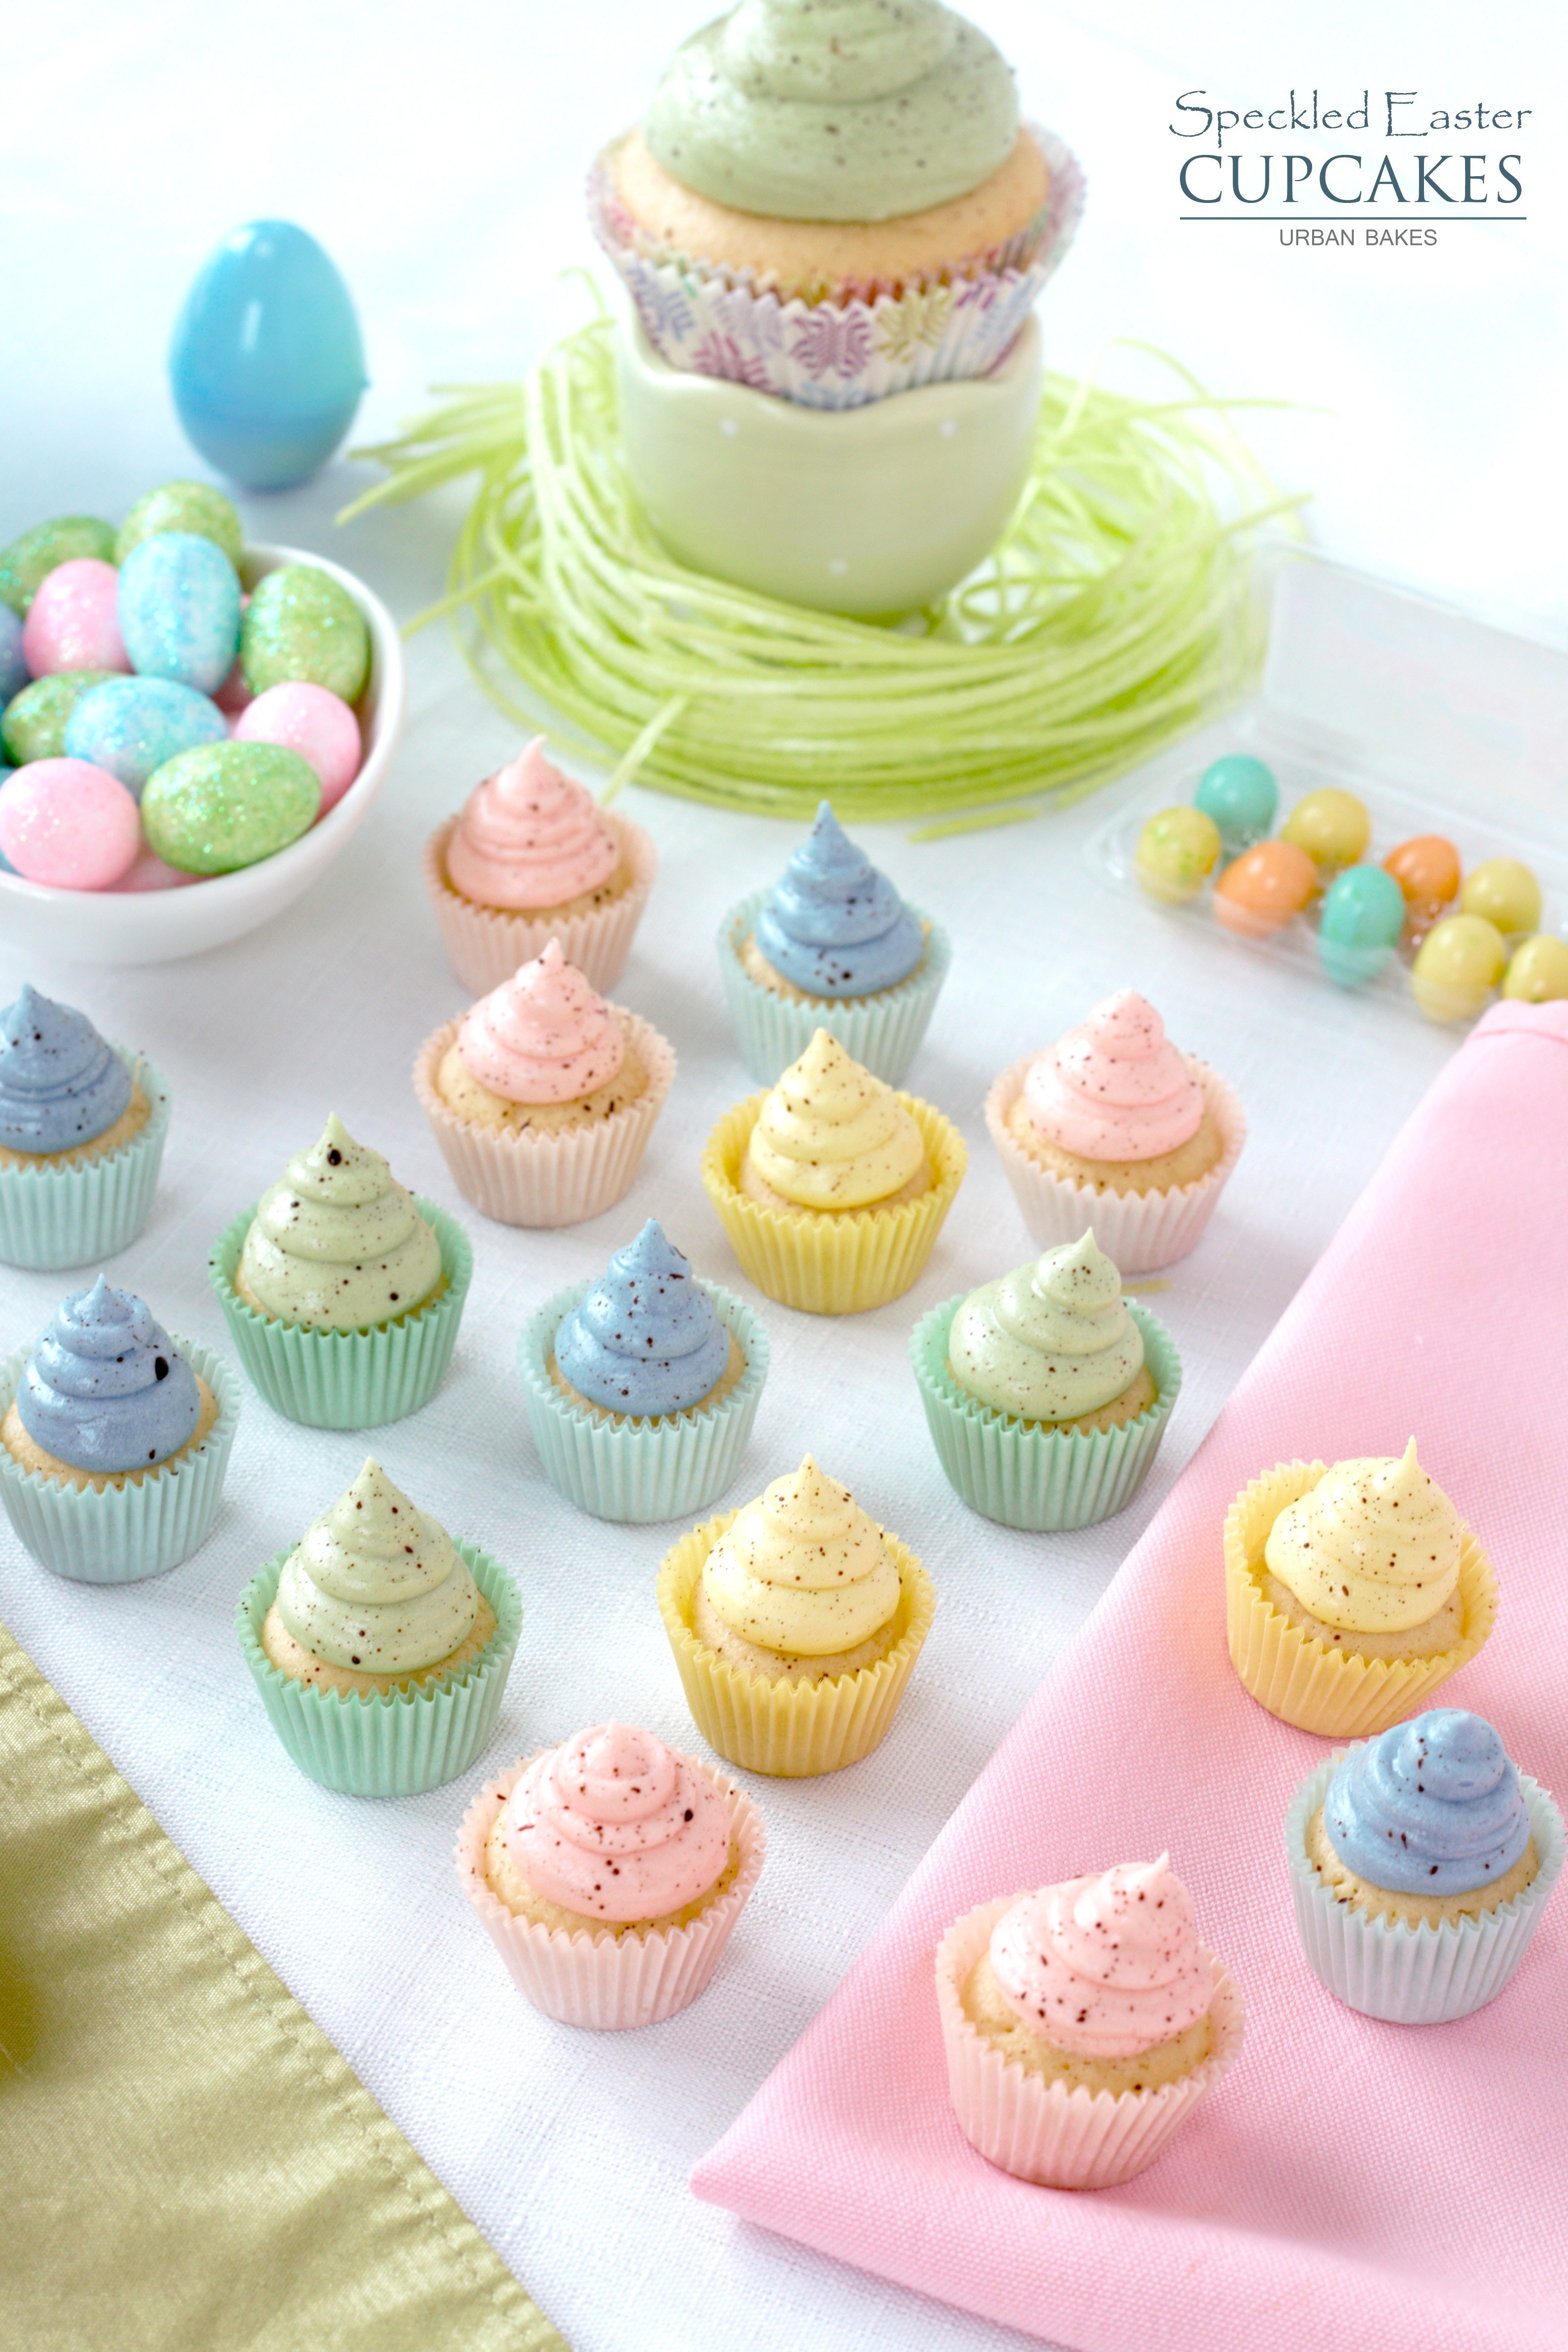 Cupcakes For Easter
 URBAN BAKES Speckled Easter Cupcakes URBAN BAKES